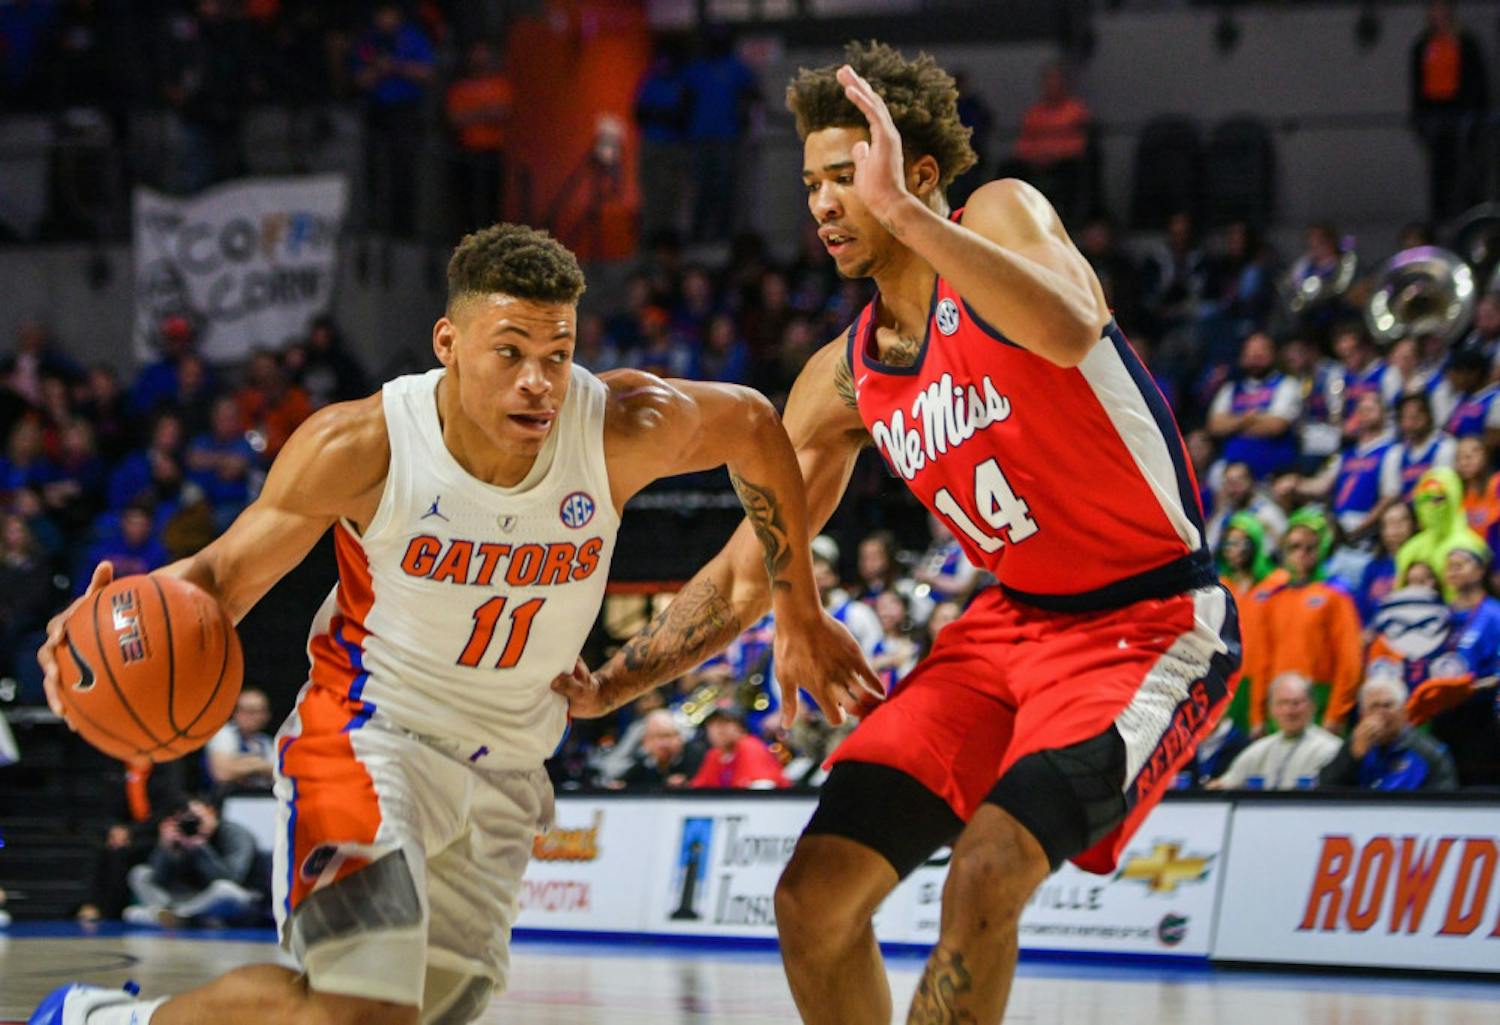 Freshman forward Keyontae Johnson made his fourth career start against Ole Miss on Wednesday. He finished with 15 points and six rebounds in the Gators' 90-86 overtime win over the Rebels.